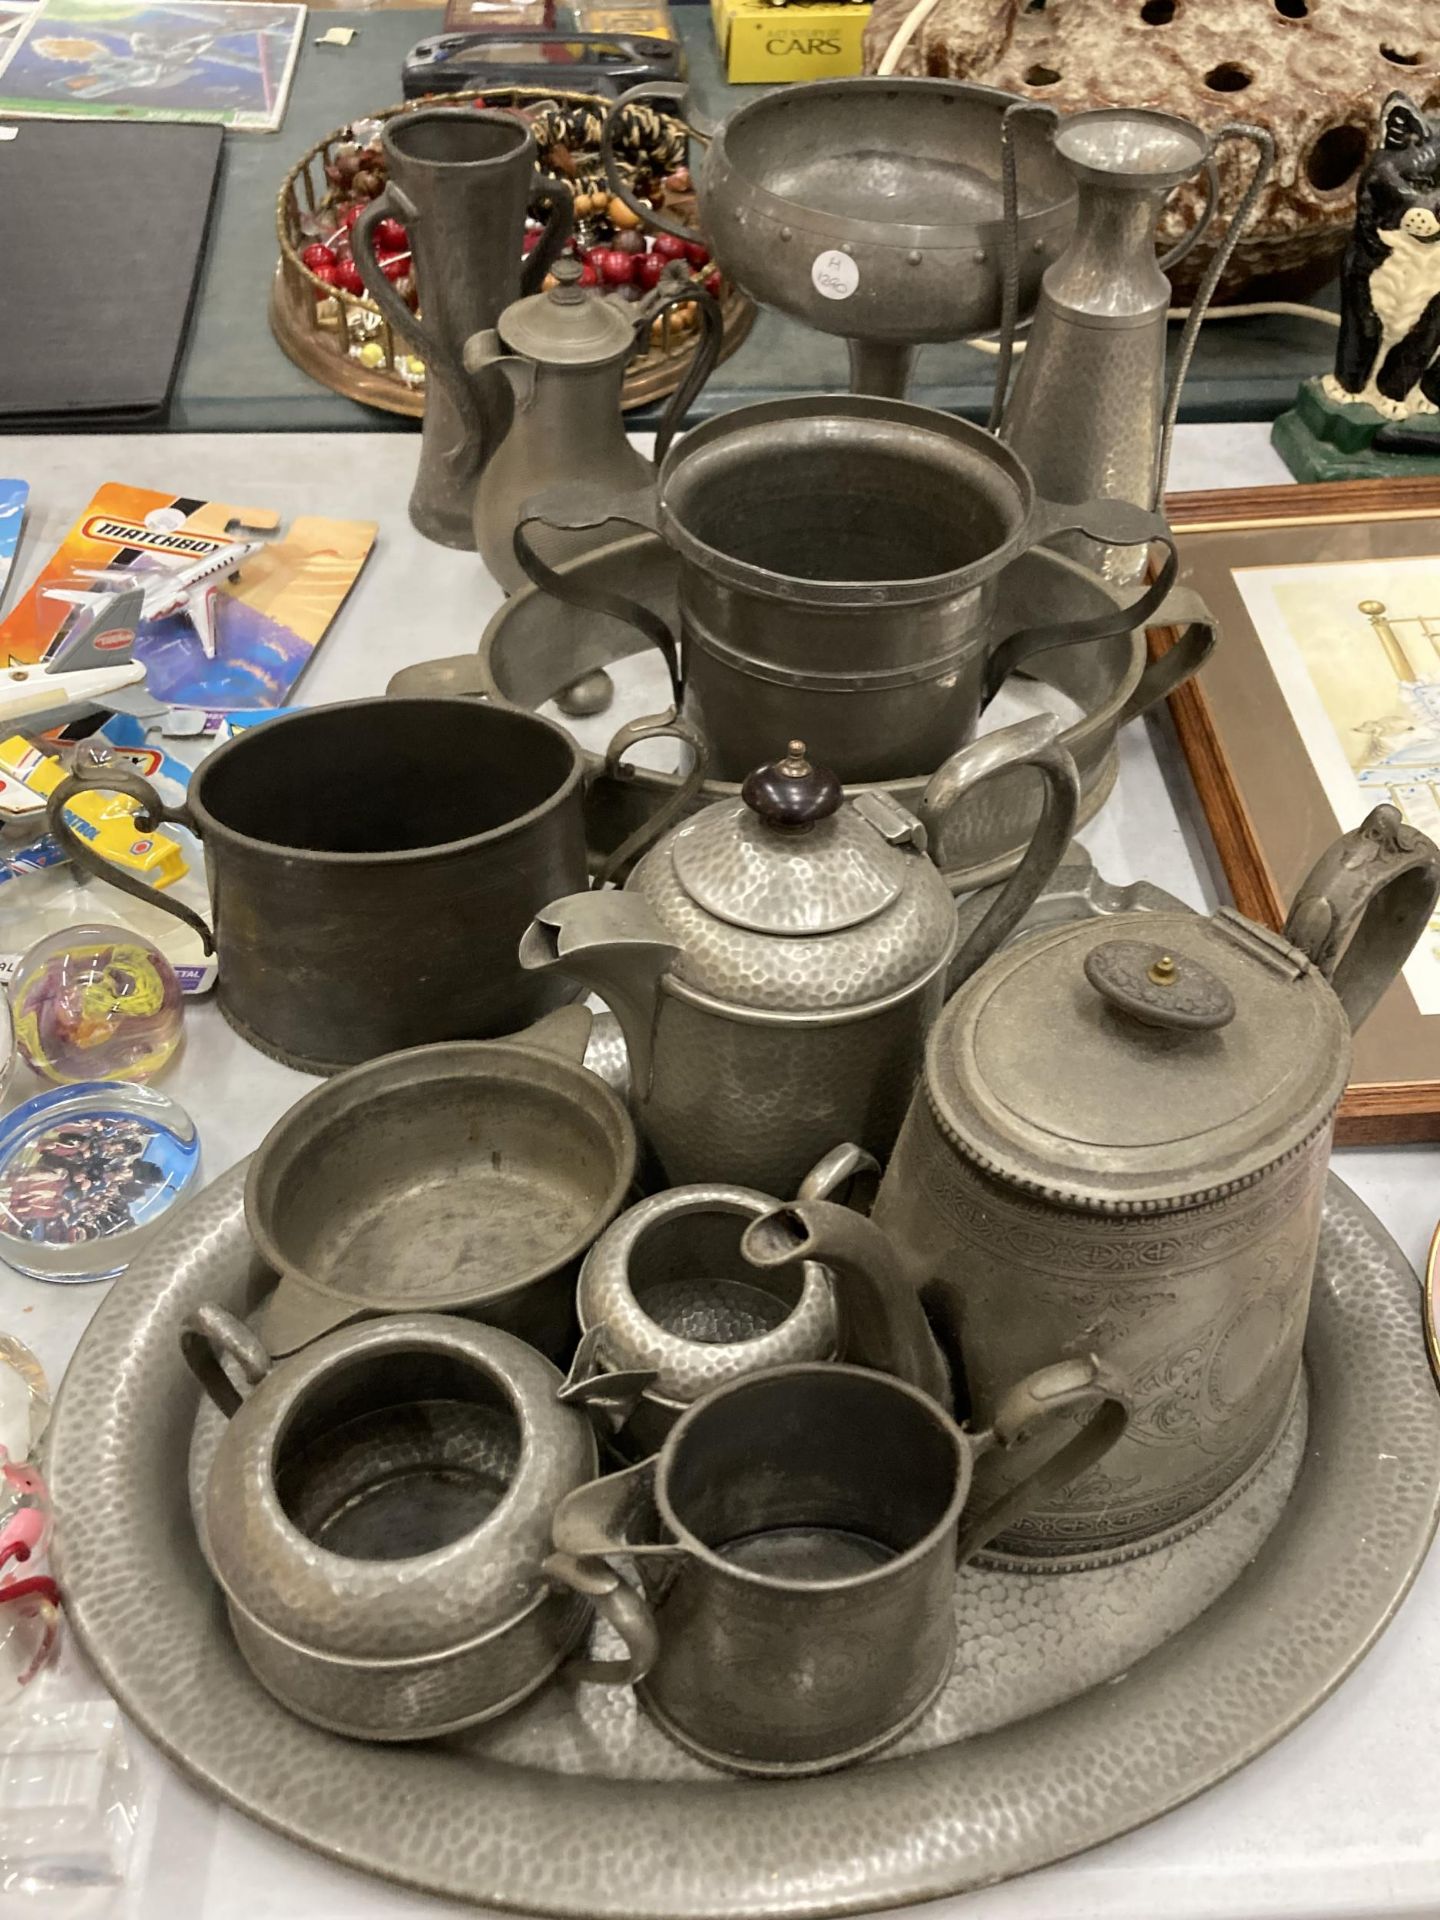 A LARGE QUANTITY OF VINTAGE PEWTER TO INCLUDE ARTS AND CRAFTS, BOWLS, A TEASET, VASES, JUGS, A TRAY,